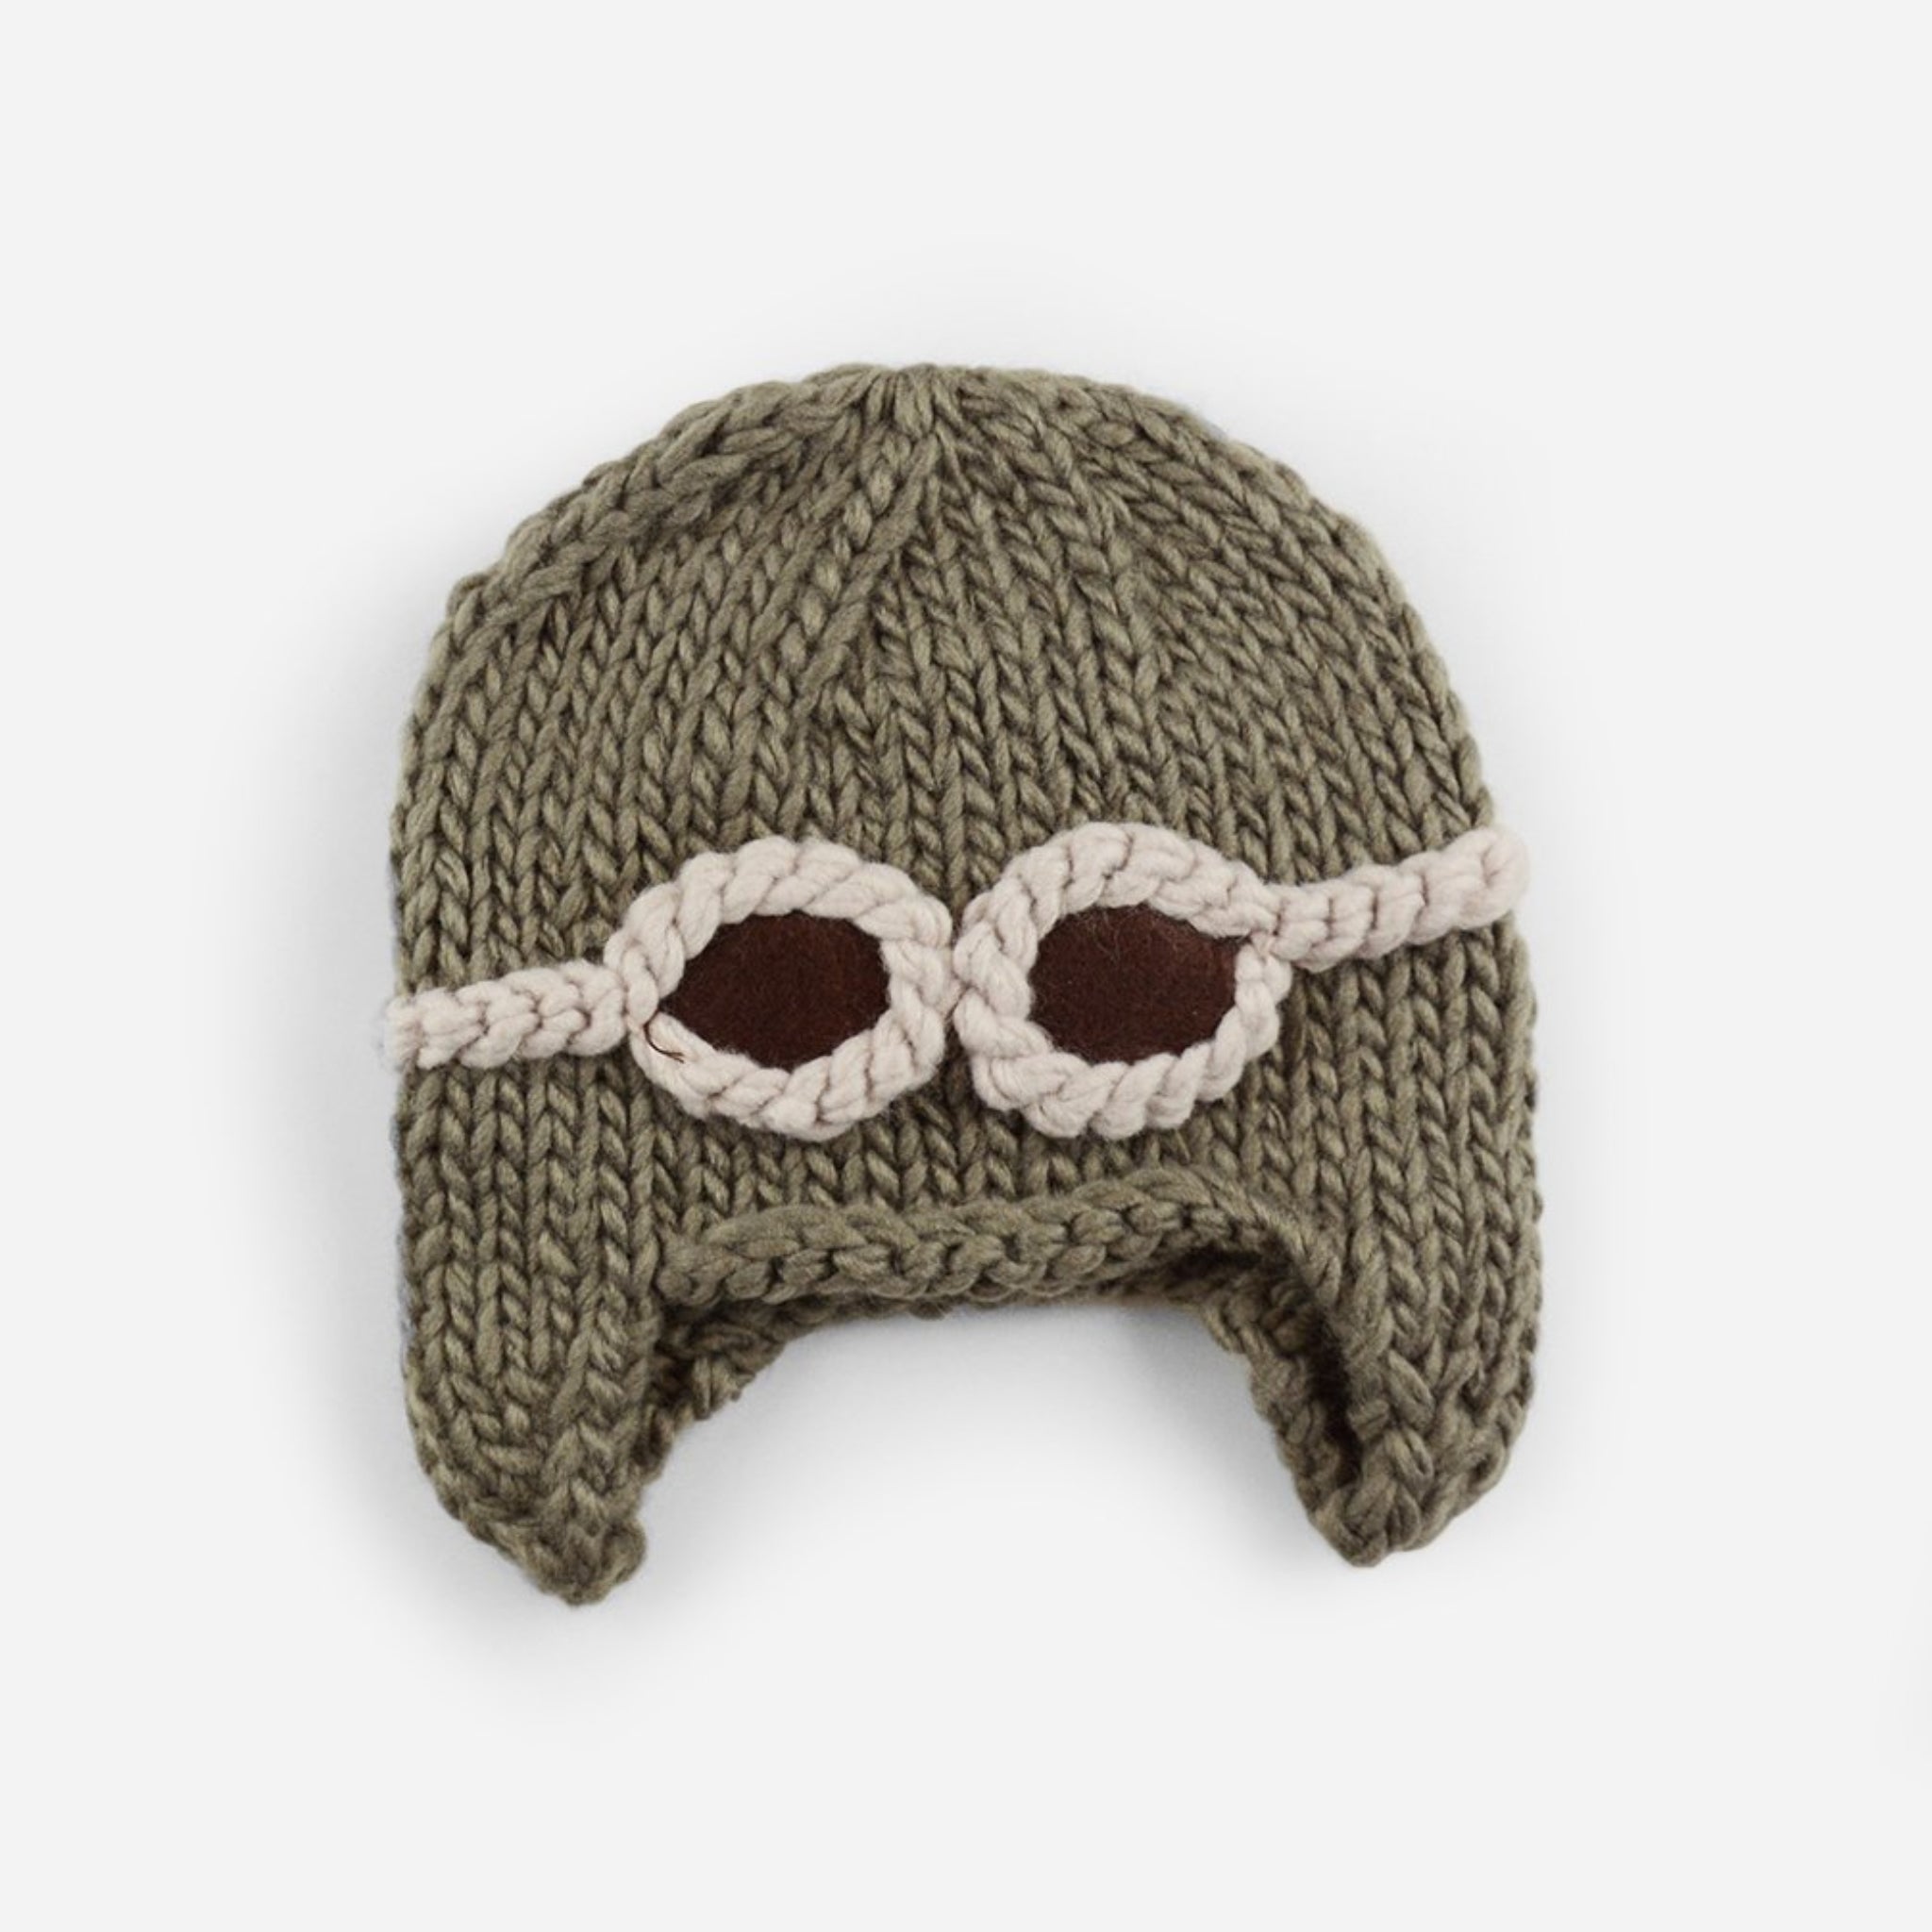 Wilbur Aviator with Goggles Knit Hat – The Blueberry Hill